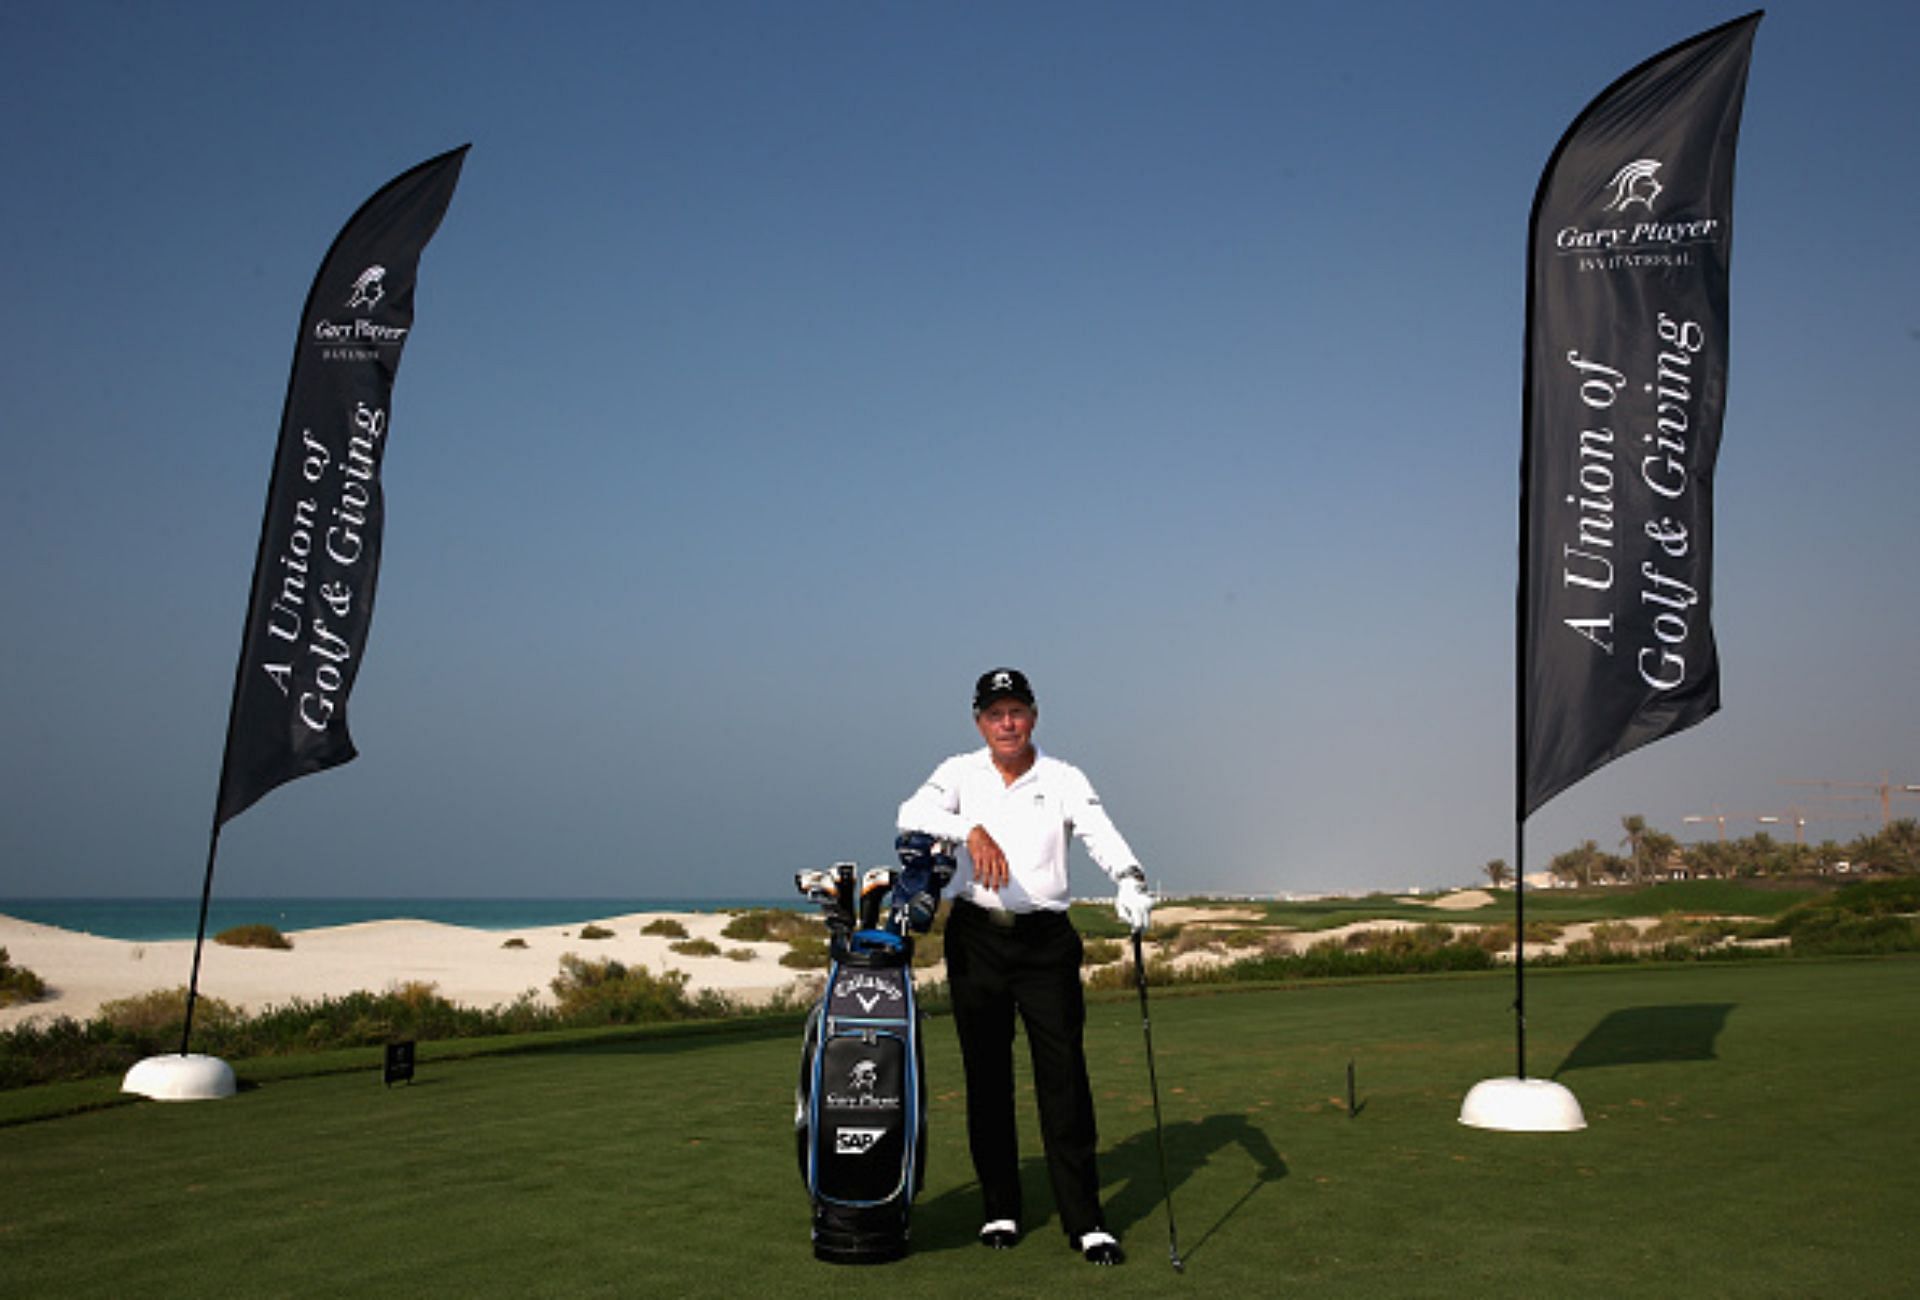 Gary Player, the best South African player in PGA Tour